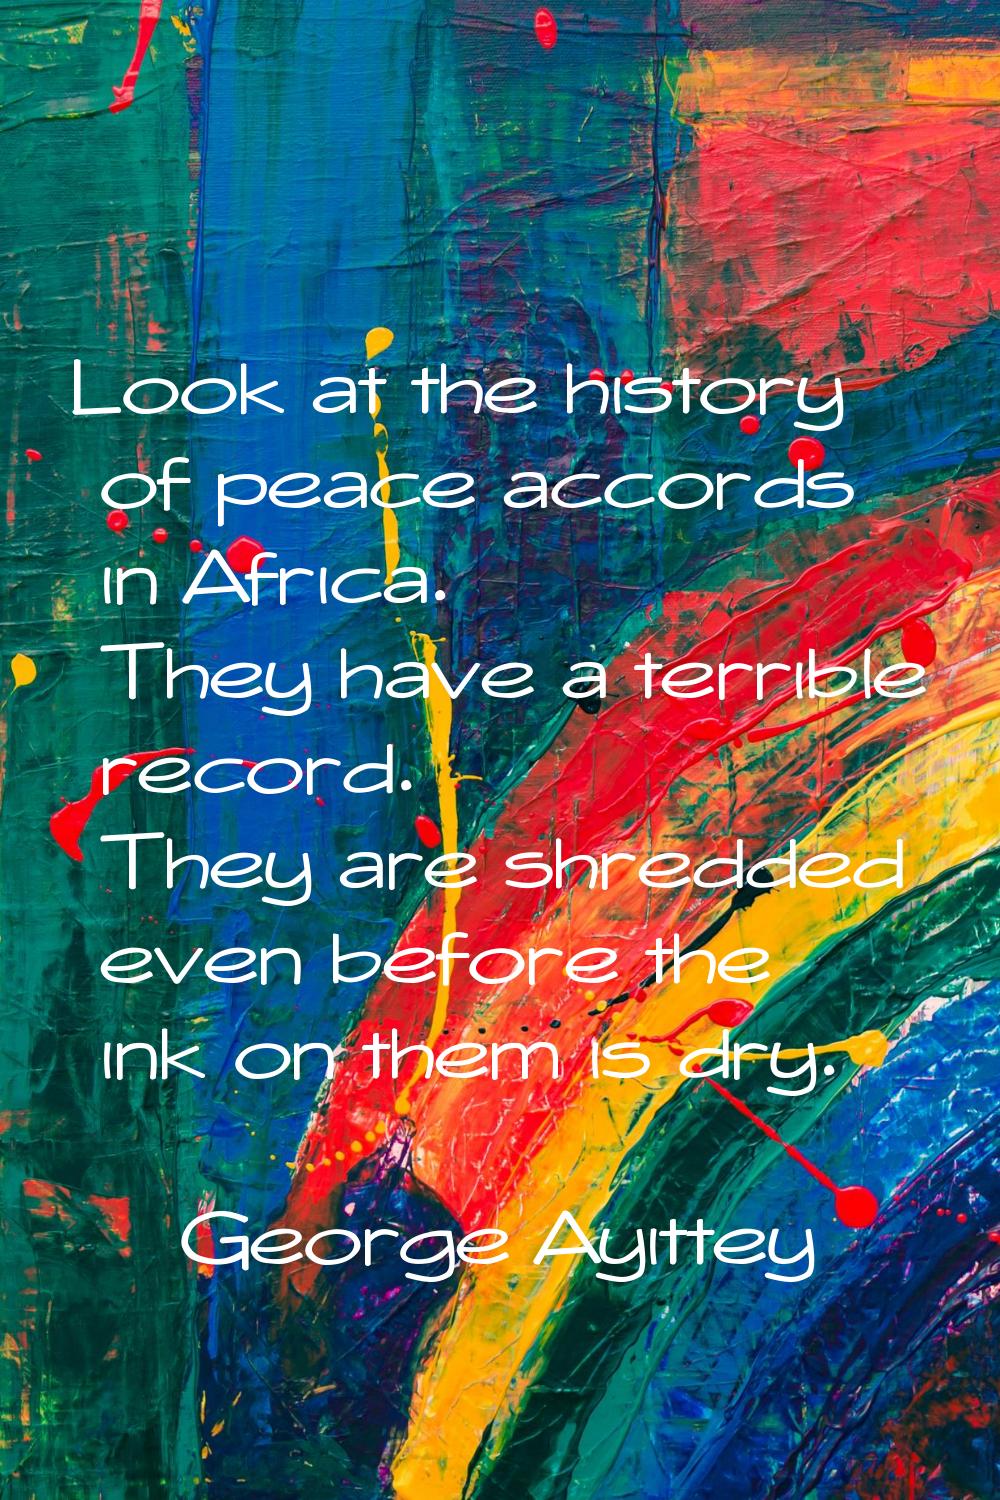 Look at the history of peace accords in Africa. They have a terrible record. They are shredded even